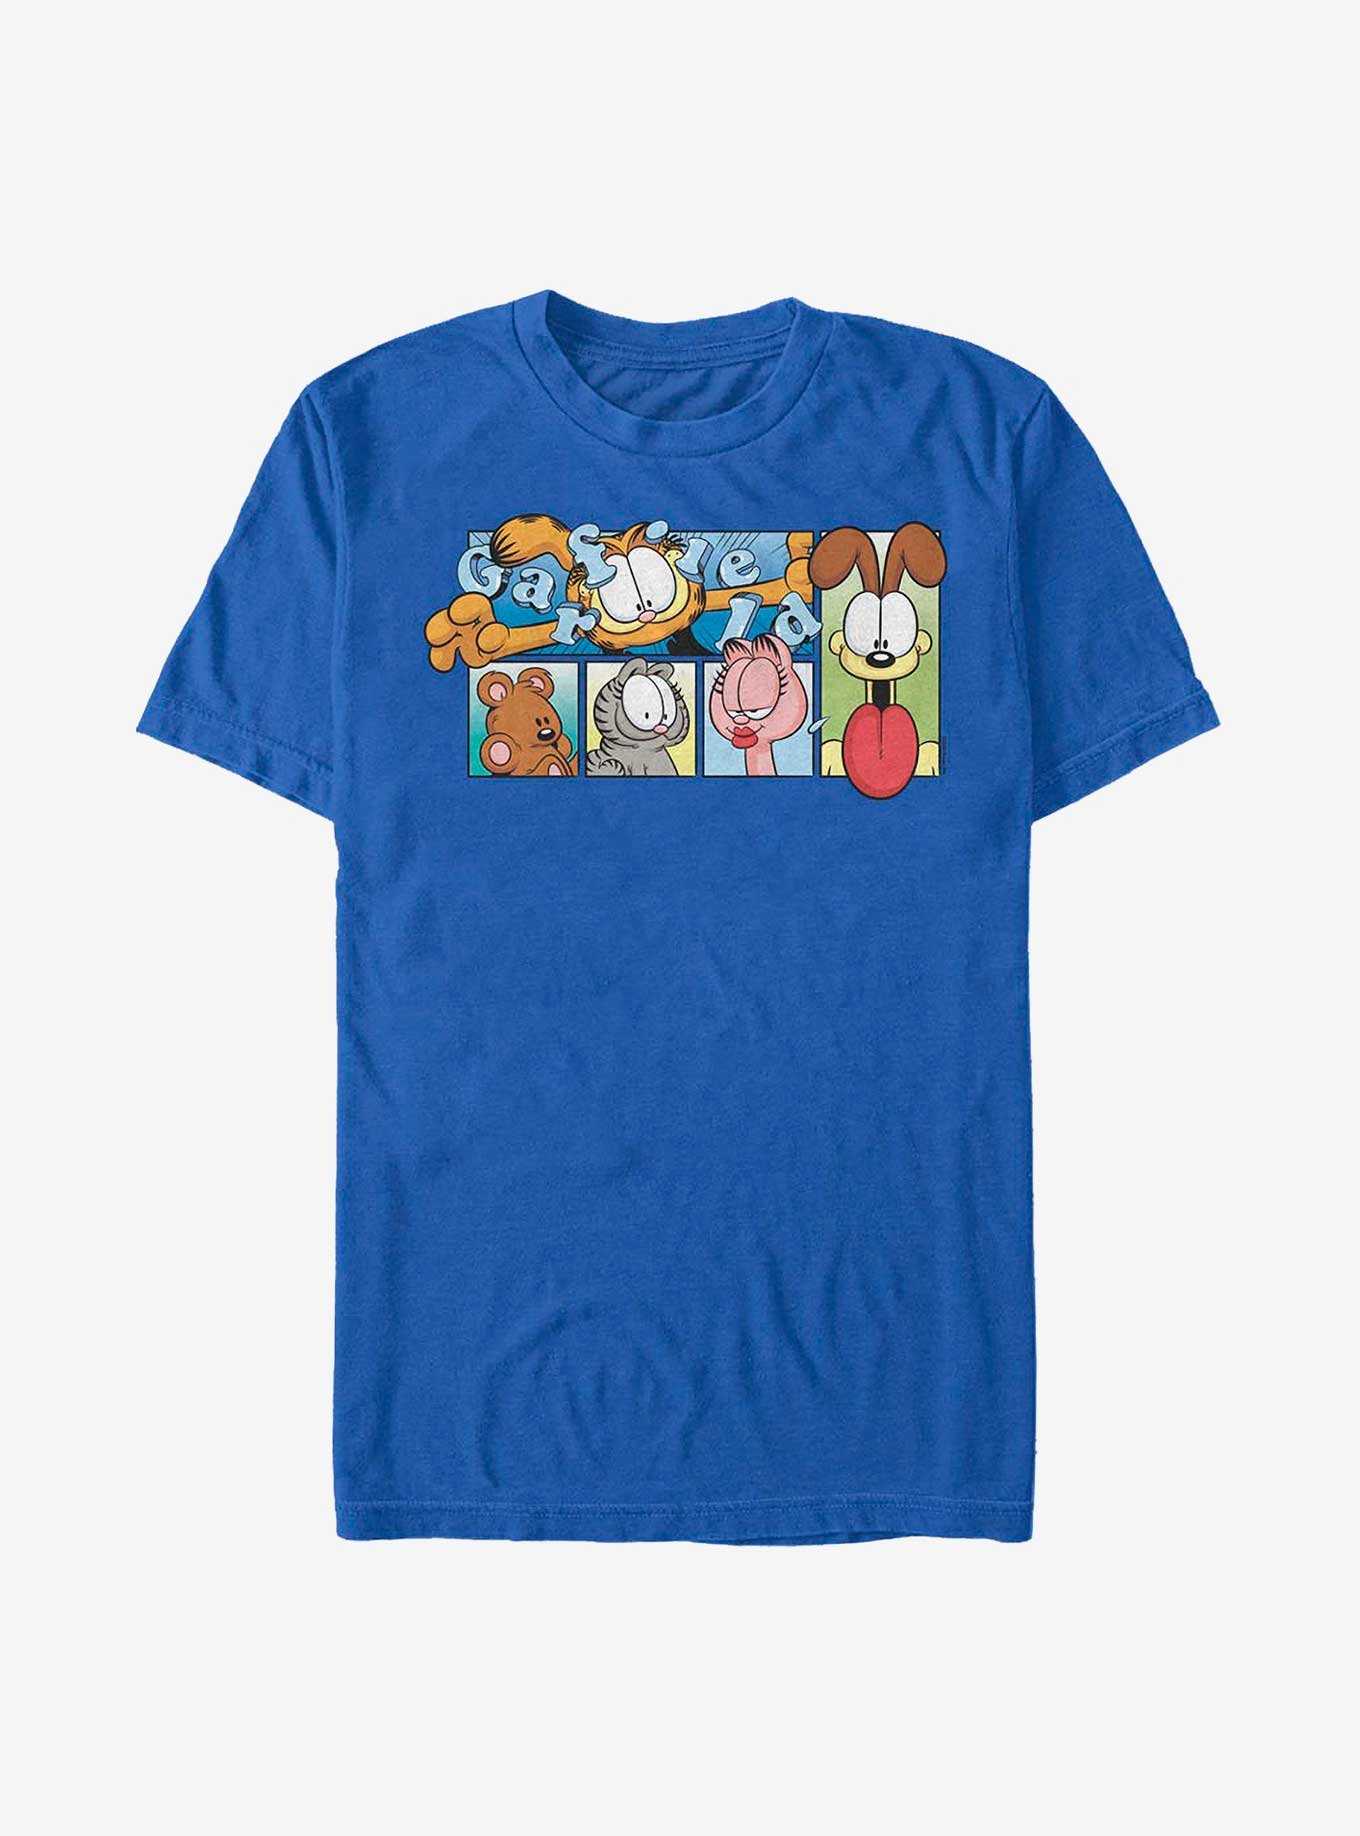 Garfield and Friends T-Shirt, , hi-res